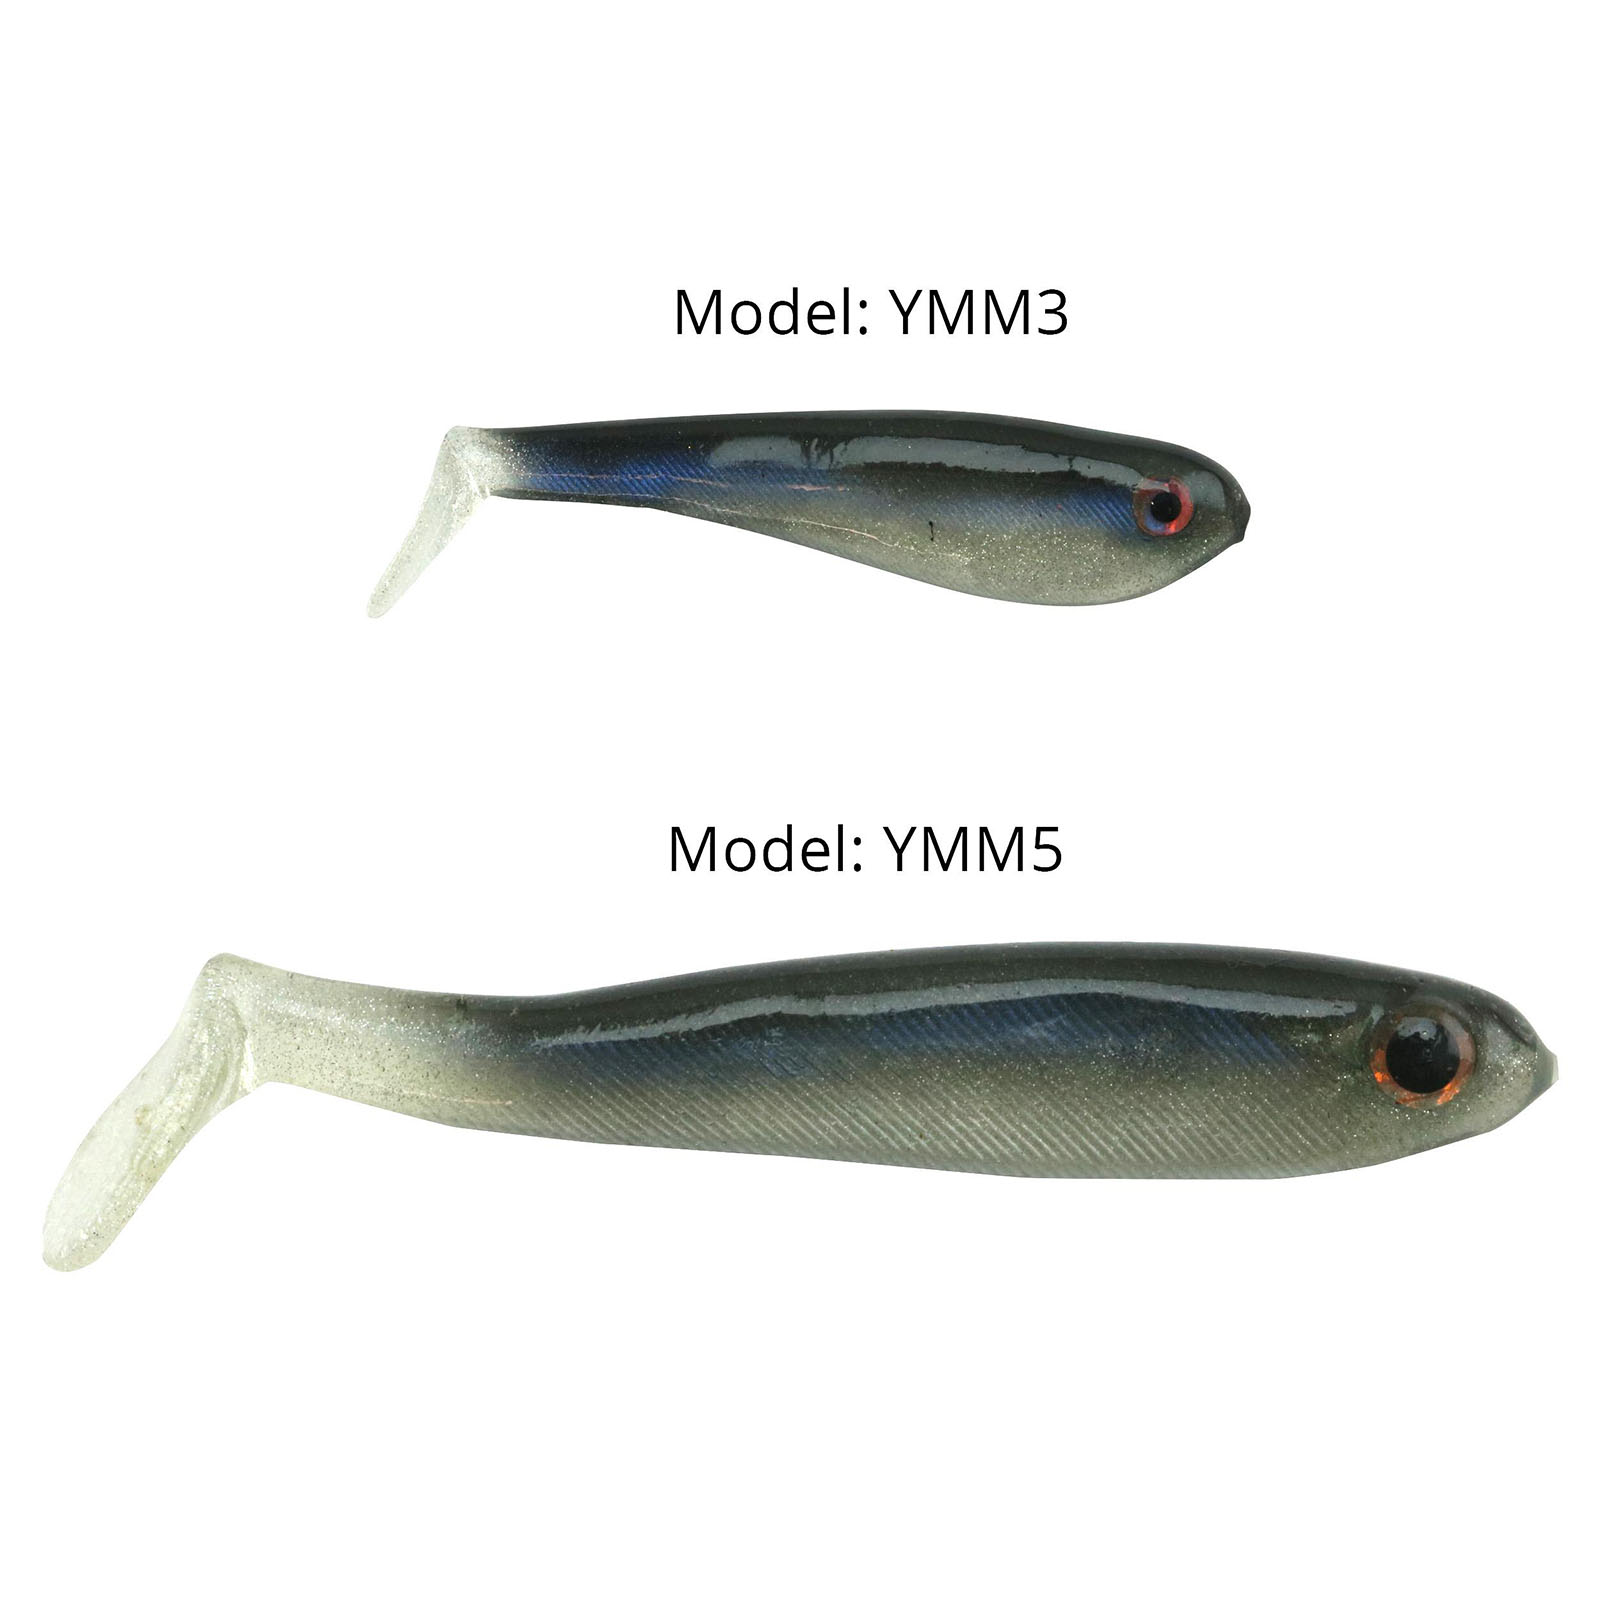 YUM Money Minnow - All sizes/colors available